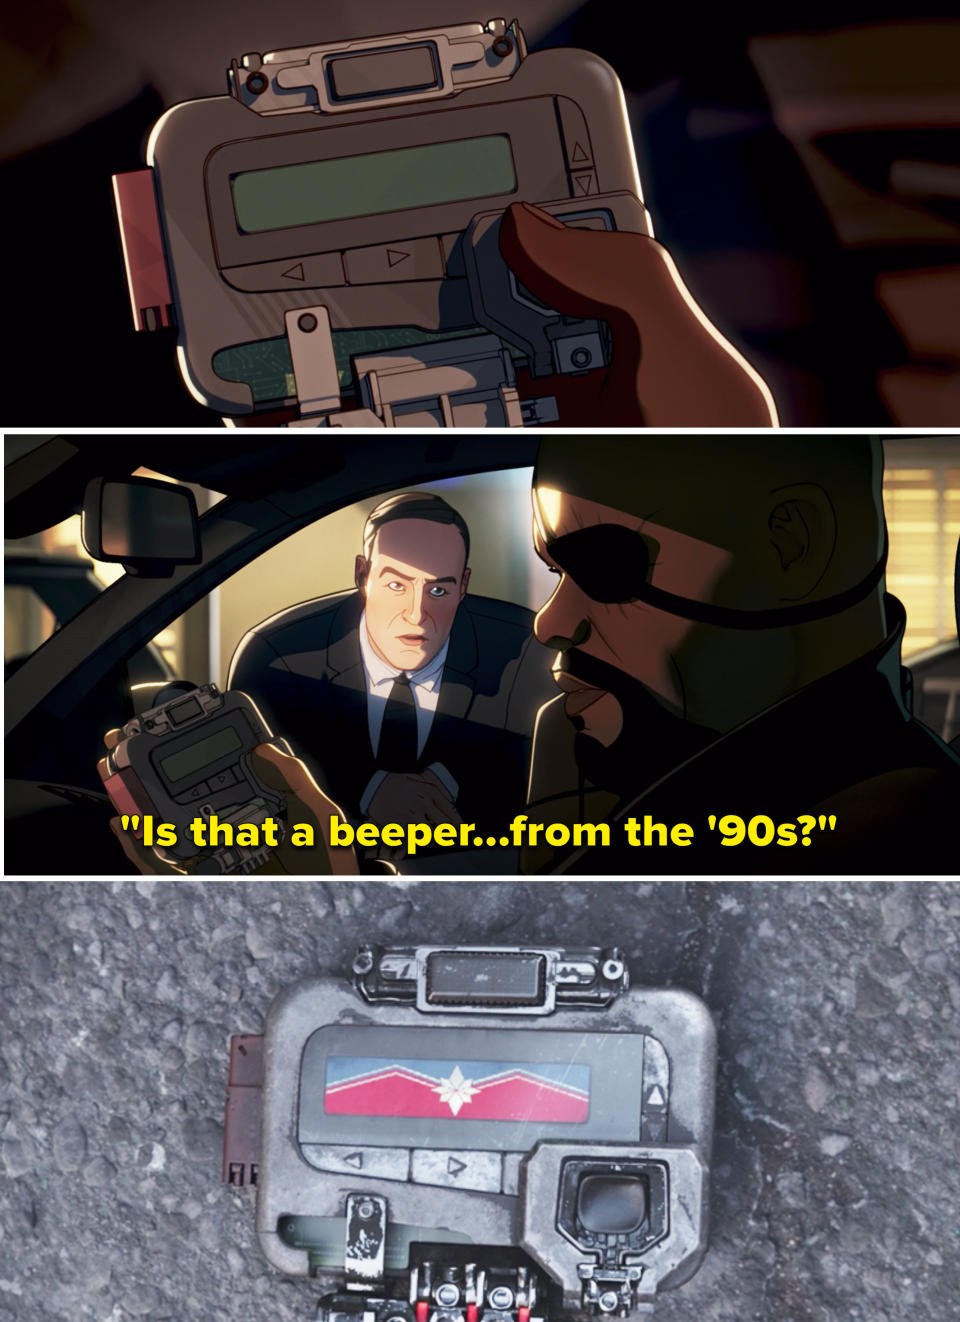 Coulson saying, "Is that a beeper...from the '90s?"